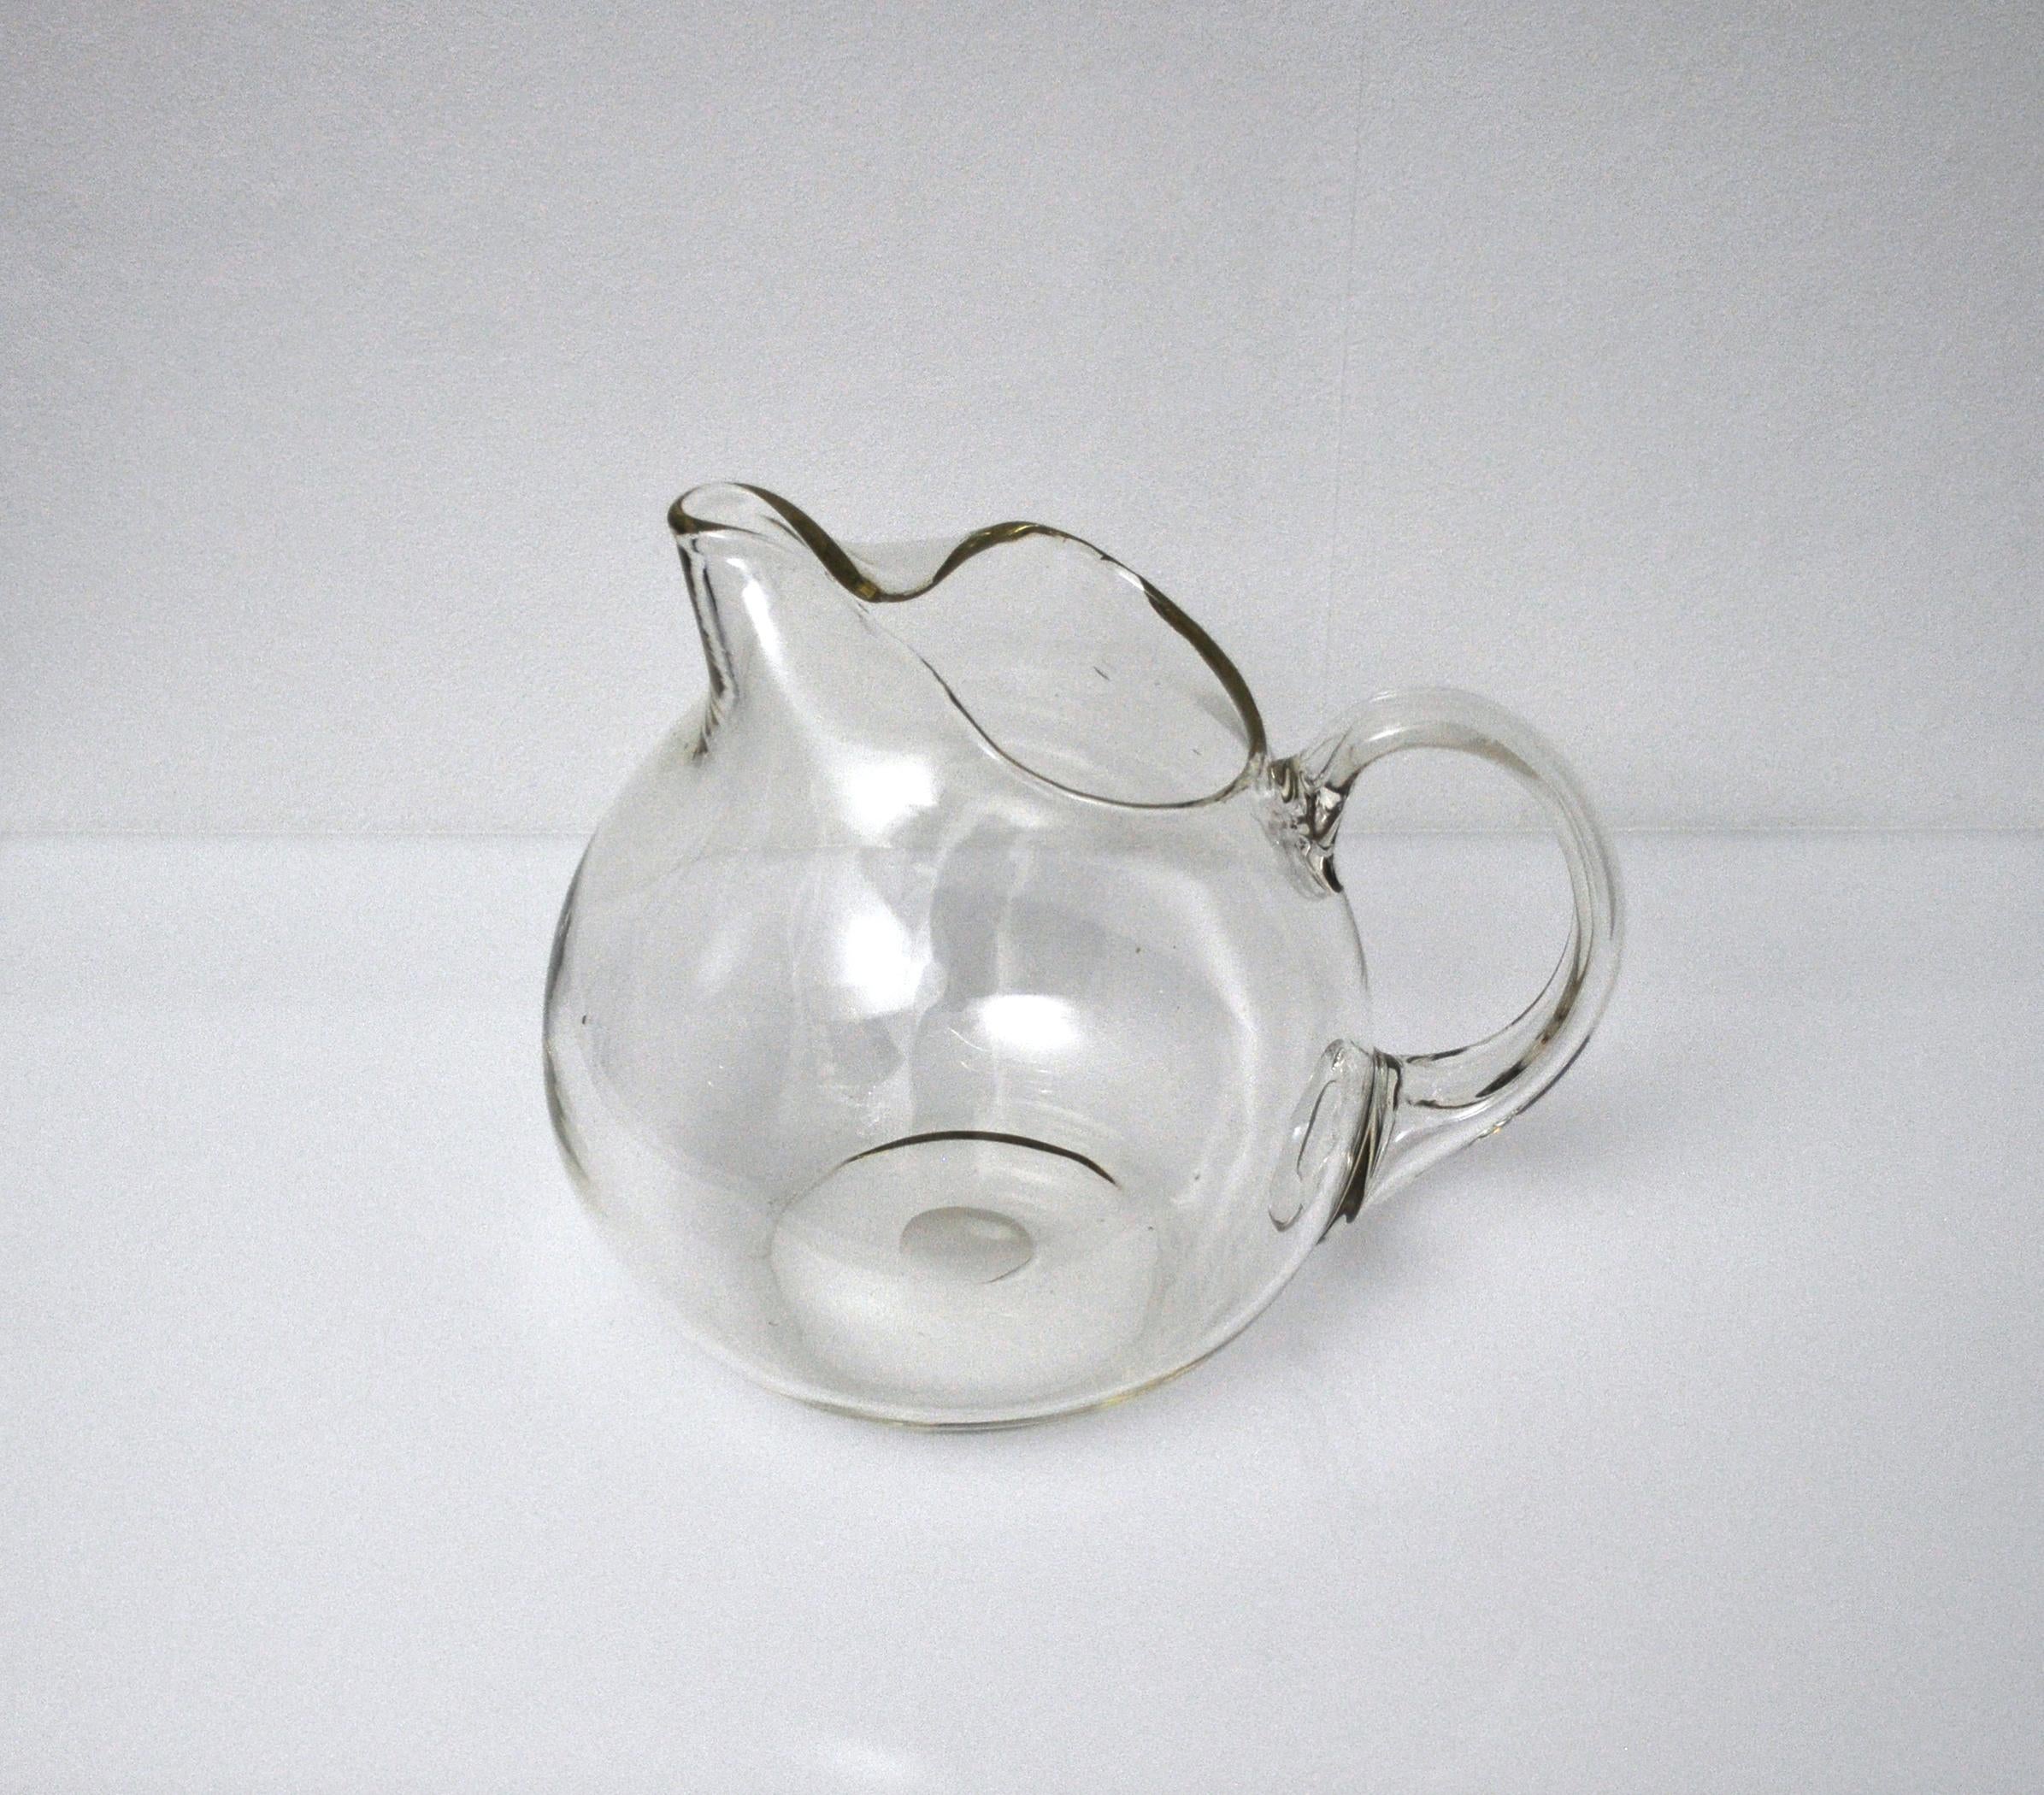 Large mouth blown glass pitcher attributed to Per Lütken or Jacob E. Bang for Holmegaard in the 1950s. 
It measures 24 cm in height and 29 x 23 cm width, length and has a yellowish tone. It can contain more than 4 liters and weighs circa 2200